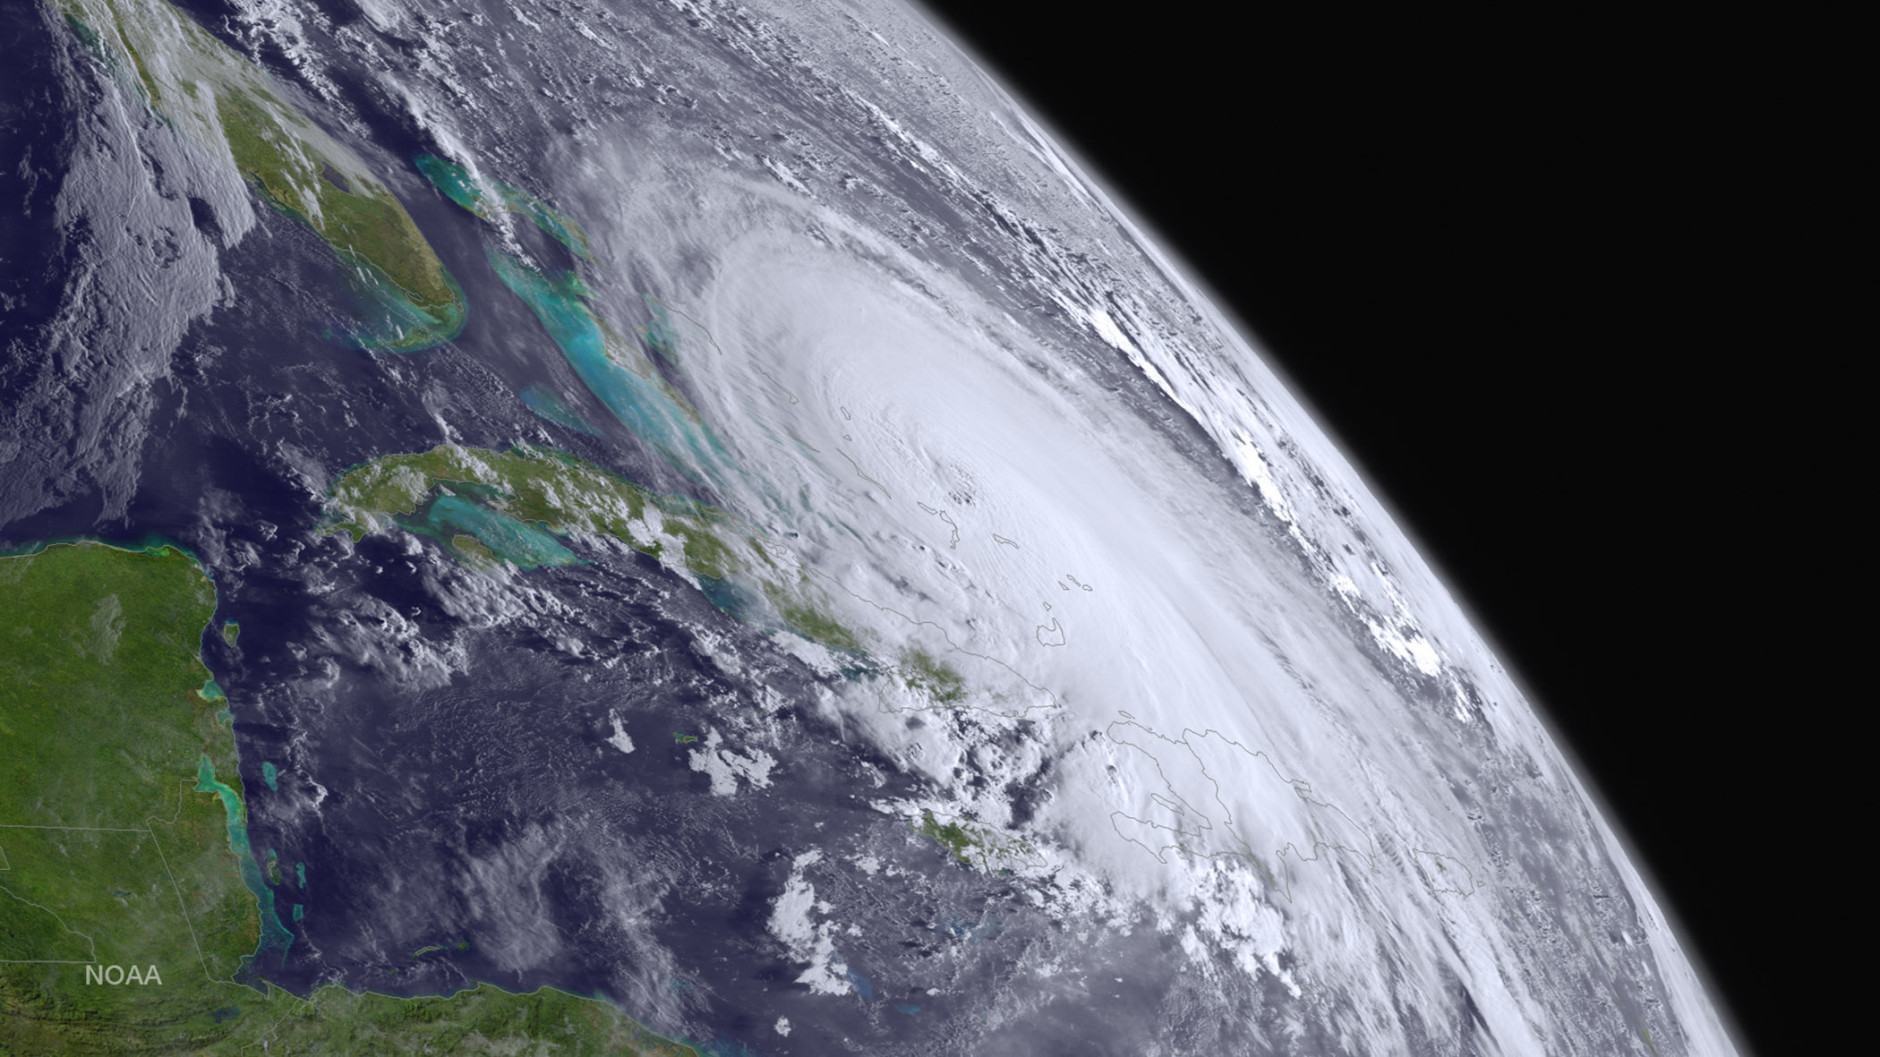 IN SPACE - OCTOBER 1:  In this handout from the National Oceanic and Atmospheric Administration (NOAA), Hurricane Joaquin is seen churning in the Atlantic on October 1, 2015. Joaquin was upgraded to a category three hurricane early on October 1. The exact track has yet to be determined, but there is a  possibity of landfall in the U.S. anywhere from North Carolina to the Northeast.  (Photo by NOAA via Getty Images)